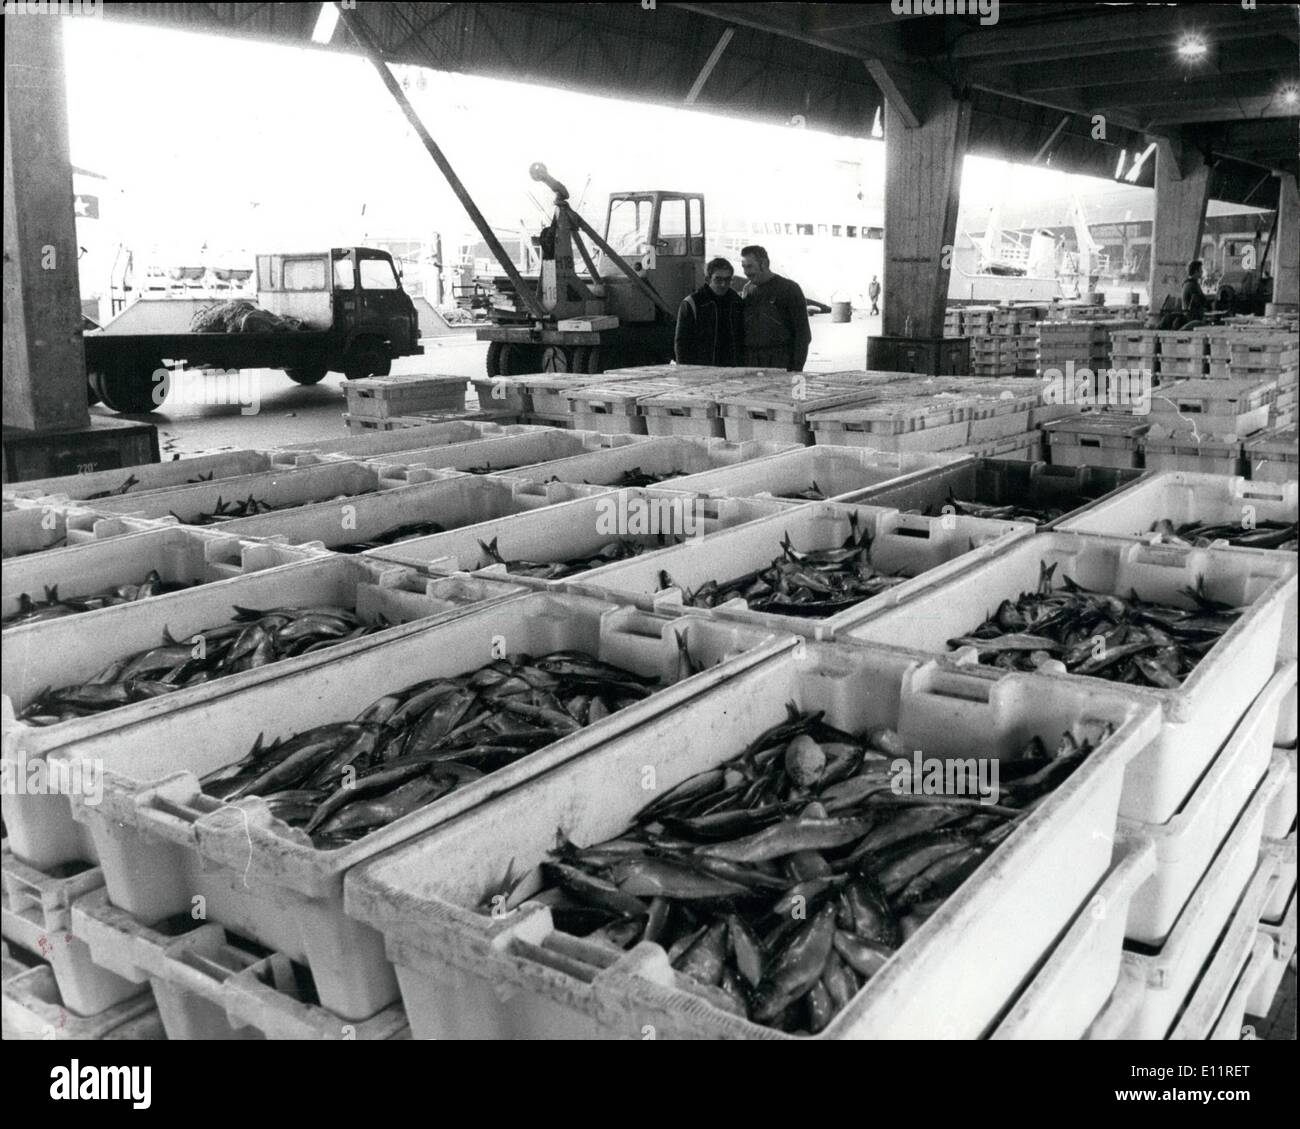 Oct. 10, 1979 - French Break Rec Ban on Herring Fishing. France which is defying the European Court by banning British Lamb imports, also appears to be ignoring a Common Market ban on Herring Fishing. Several tons of fresh herring were landed at Boulogne fish docks at dawn yesterday and four big deep seas stern trawlers were tied up at the Quai du Bassin. When the Daily Telegraph photographers Anthony Marshall was taking pictures the French dock workers tried to persuade him that they were sardines, and not herrings. He was asked to leave the fish salesroom soon after it opened at 7 a.m Stock Photo